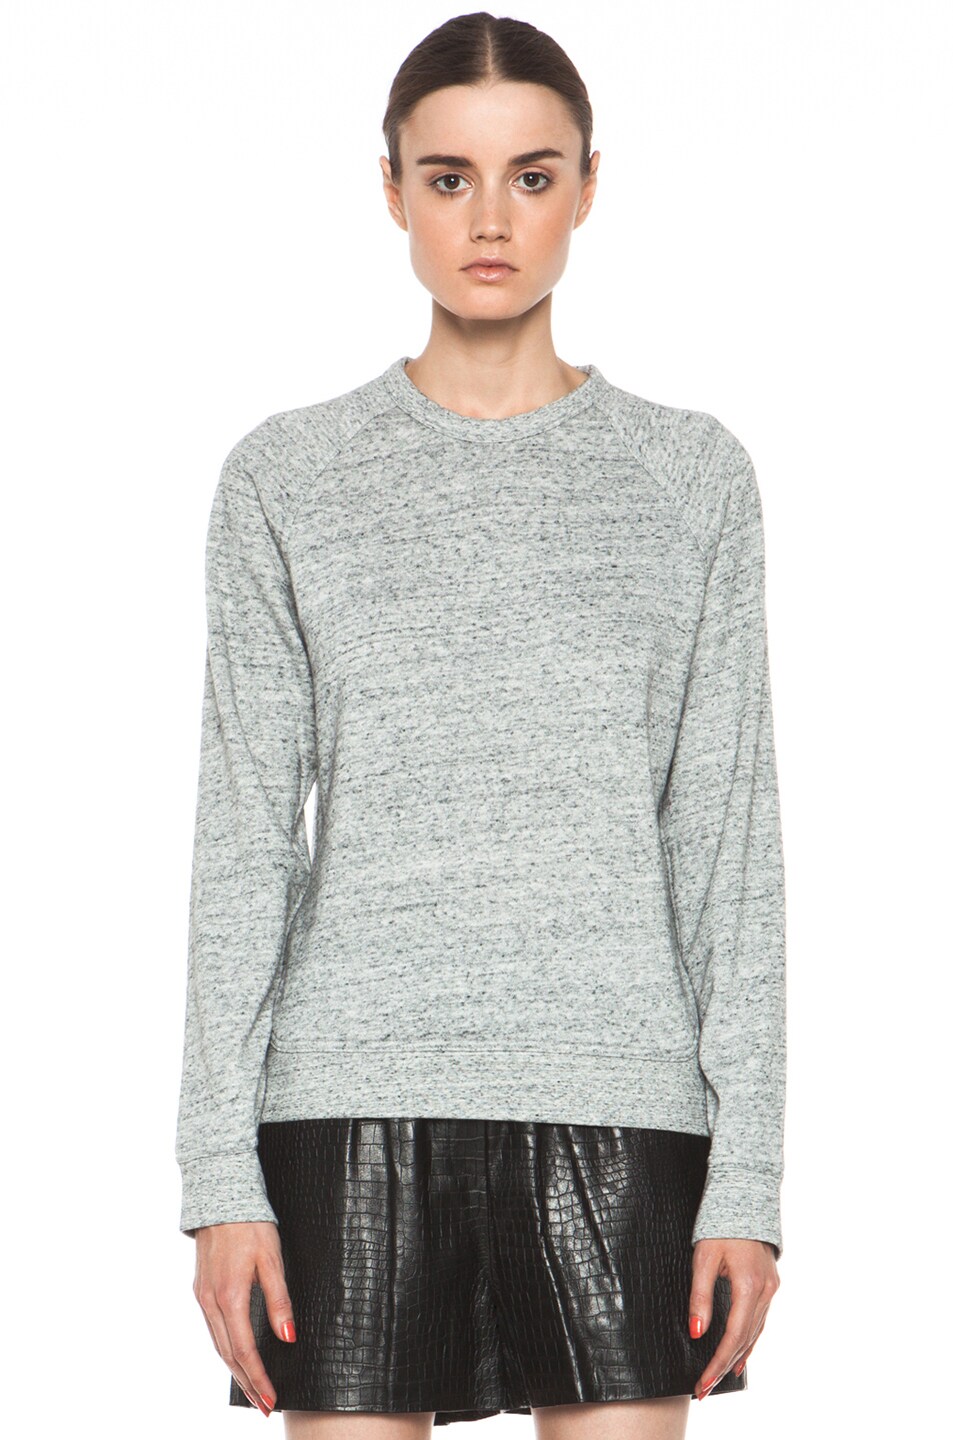 T by Alexander Wang French Terry Crew Neck Sweatshirt in Light Heather ...